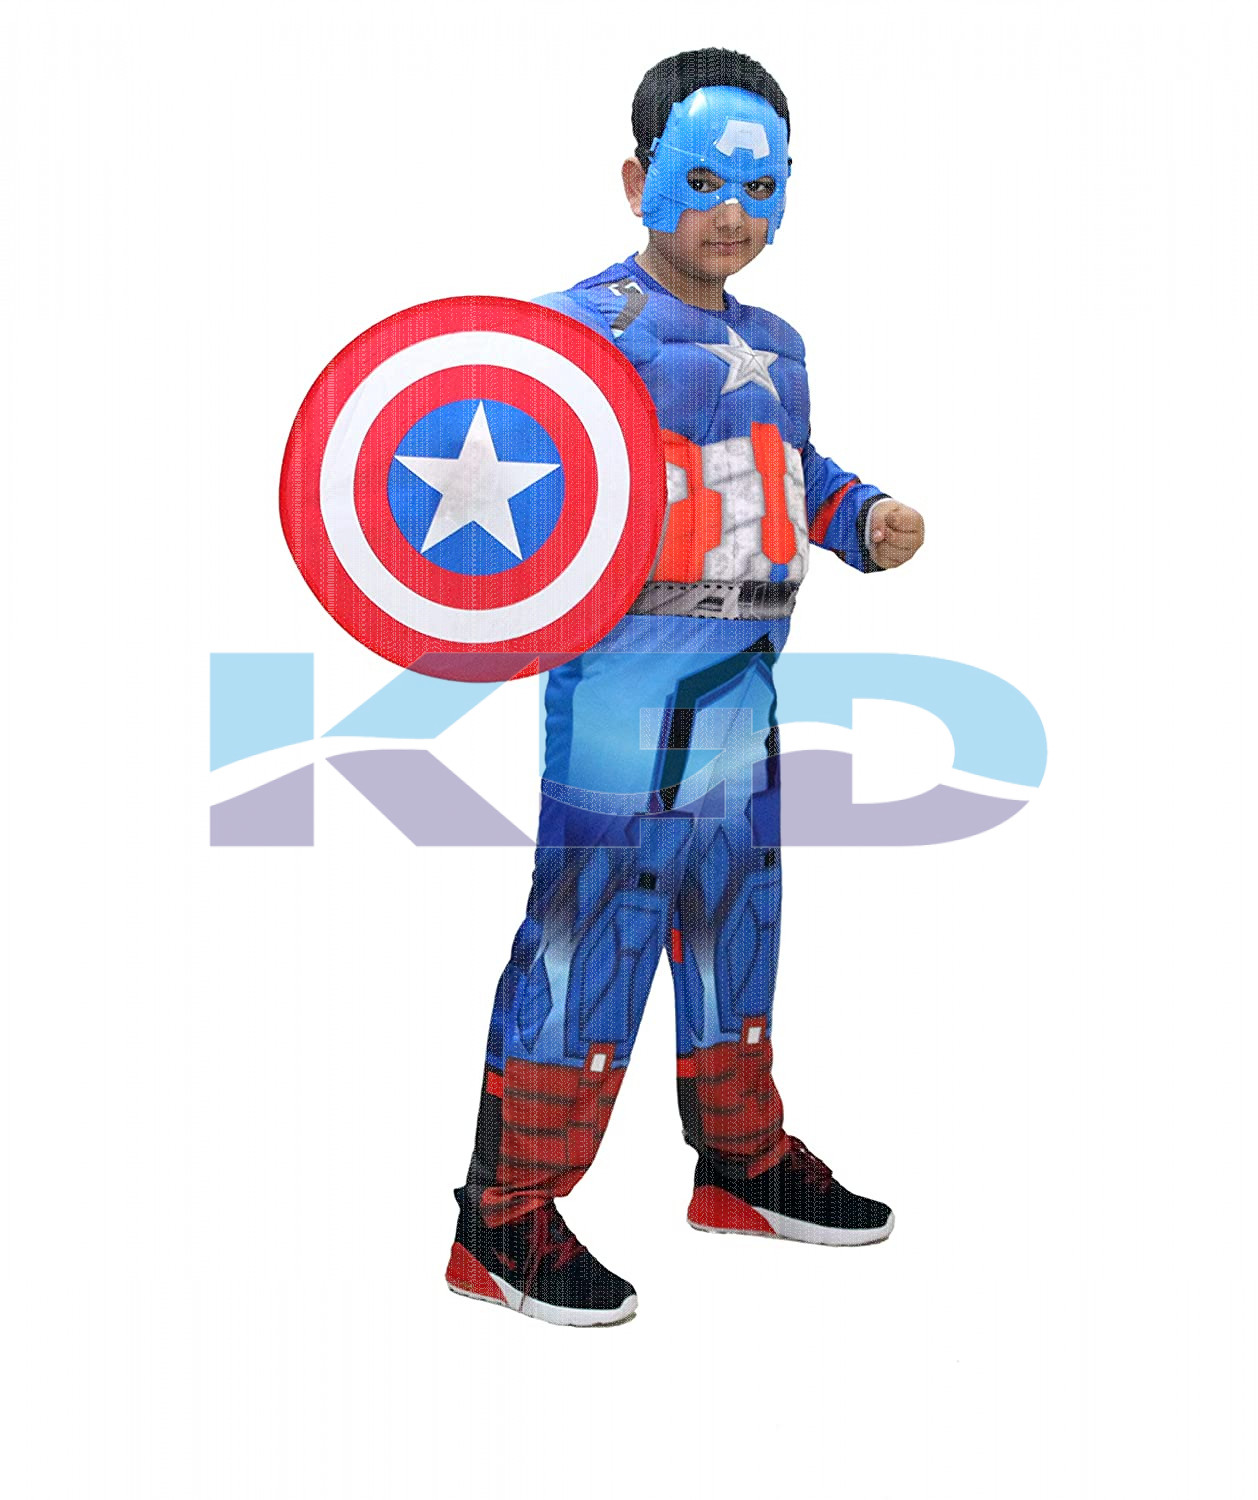 Captain imported fancy dress for kids,Cartoon/superhero Costume for School Annual function/Theme Party/Competition/Stage Shows Dress